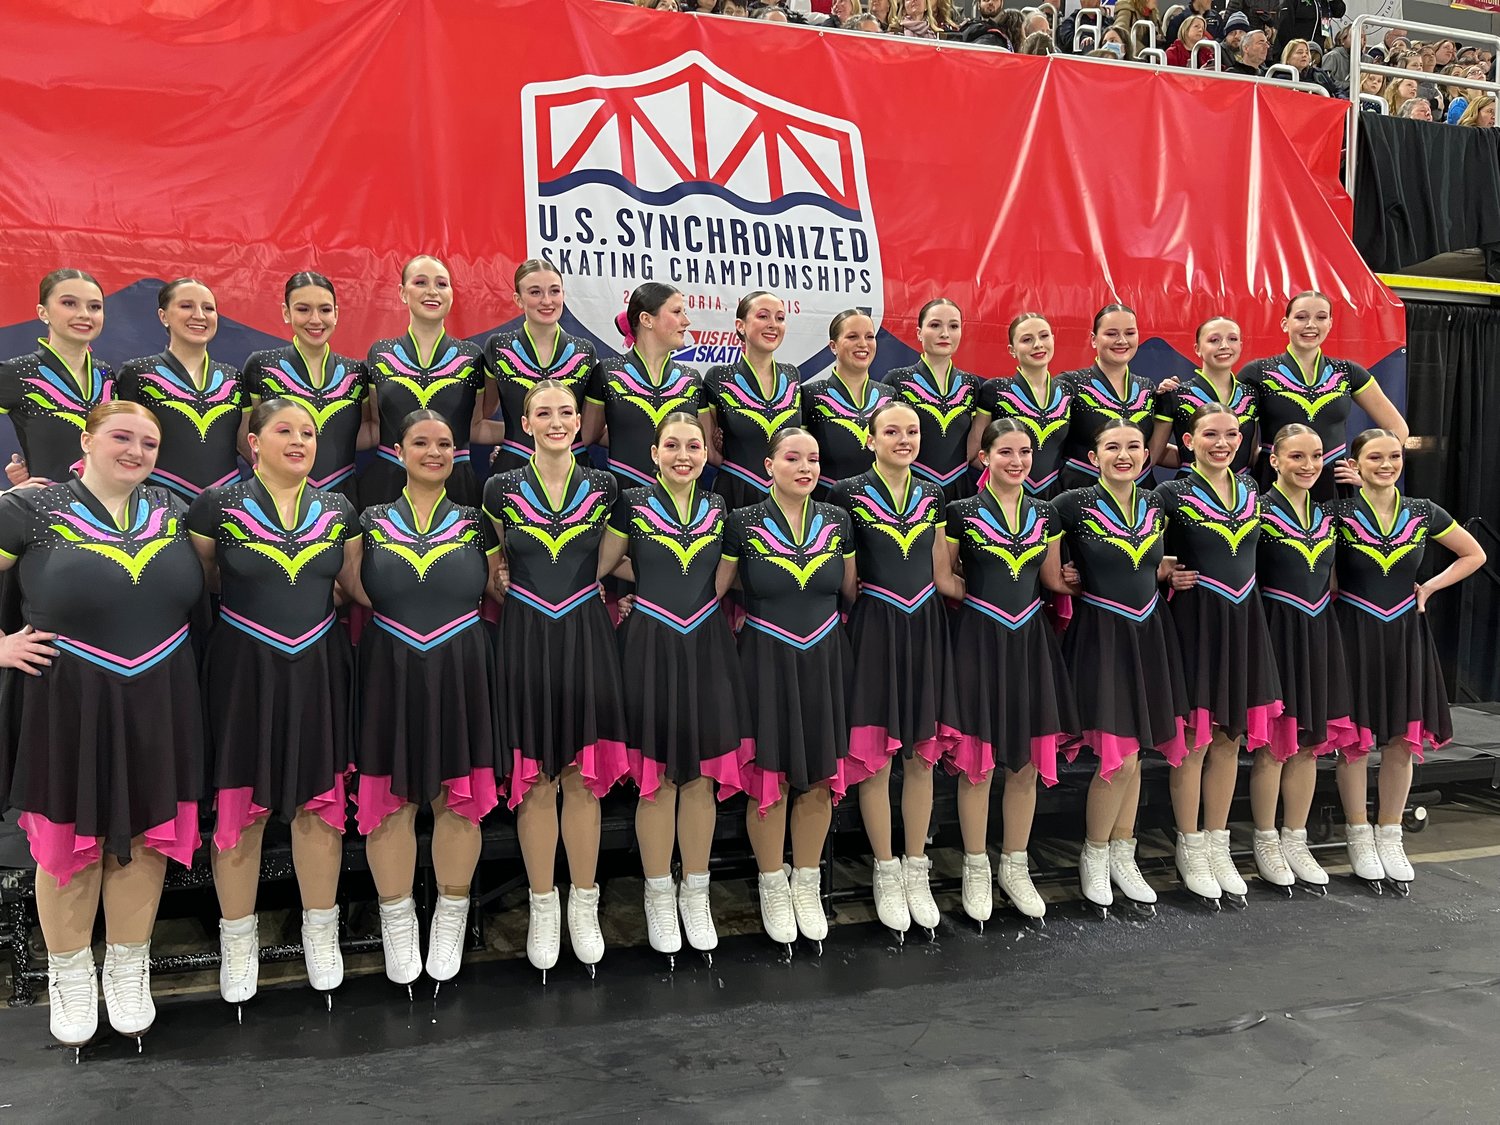 The University of Delaware collegiate synchronized skating team, which includes Nantucket’s Amanda Mack, back row, center, finished sixth at last weekend’s U.S. Synchronized Skating Championships.